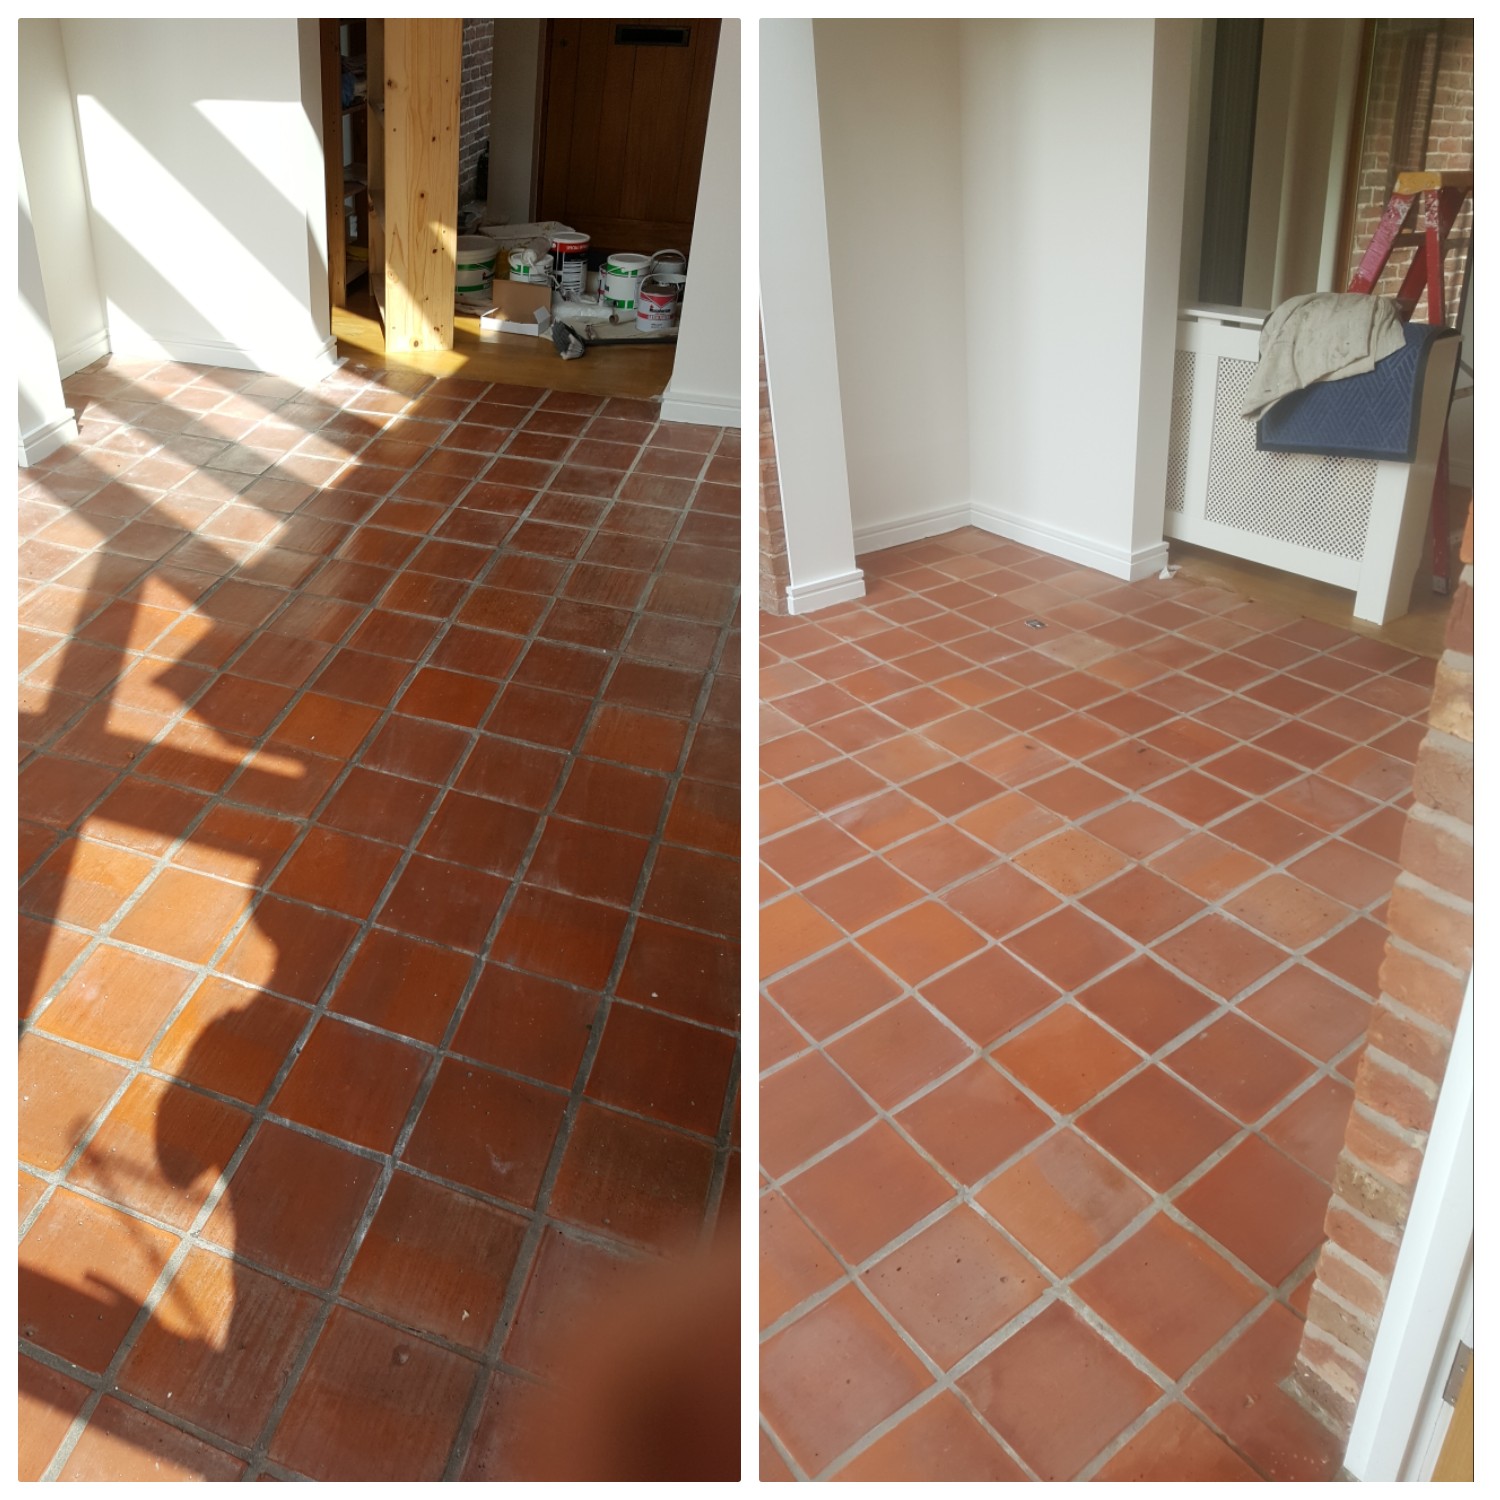 Tile cleaning in York